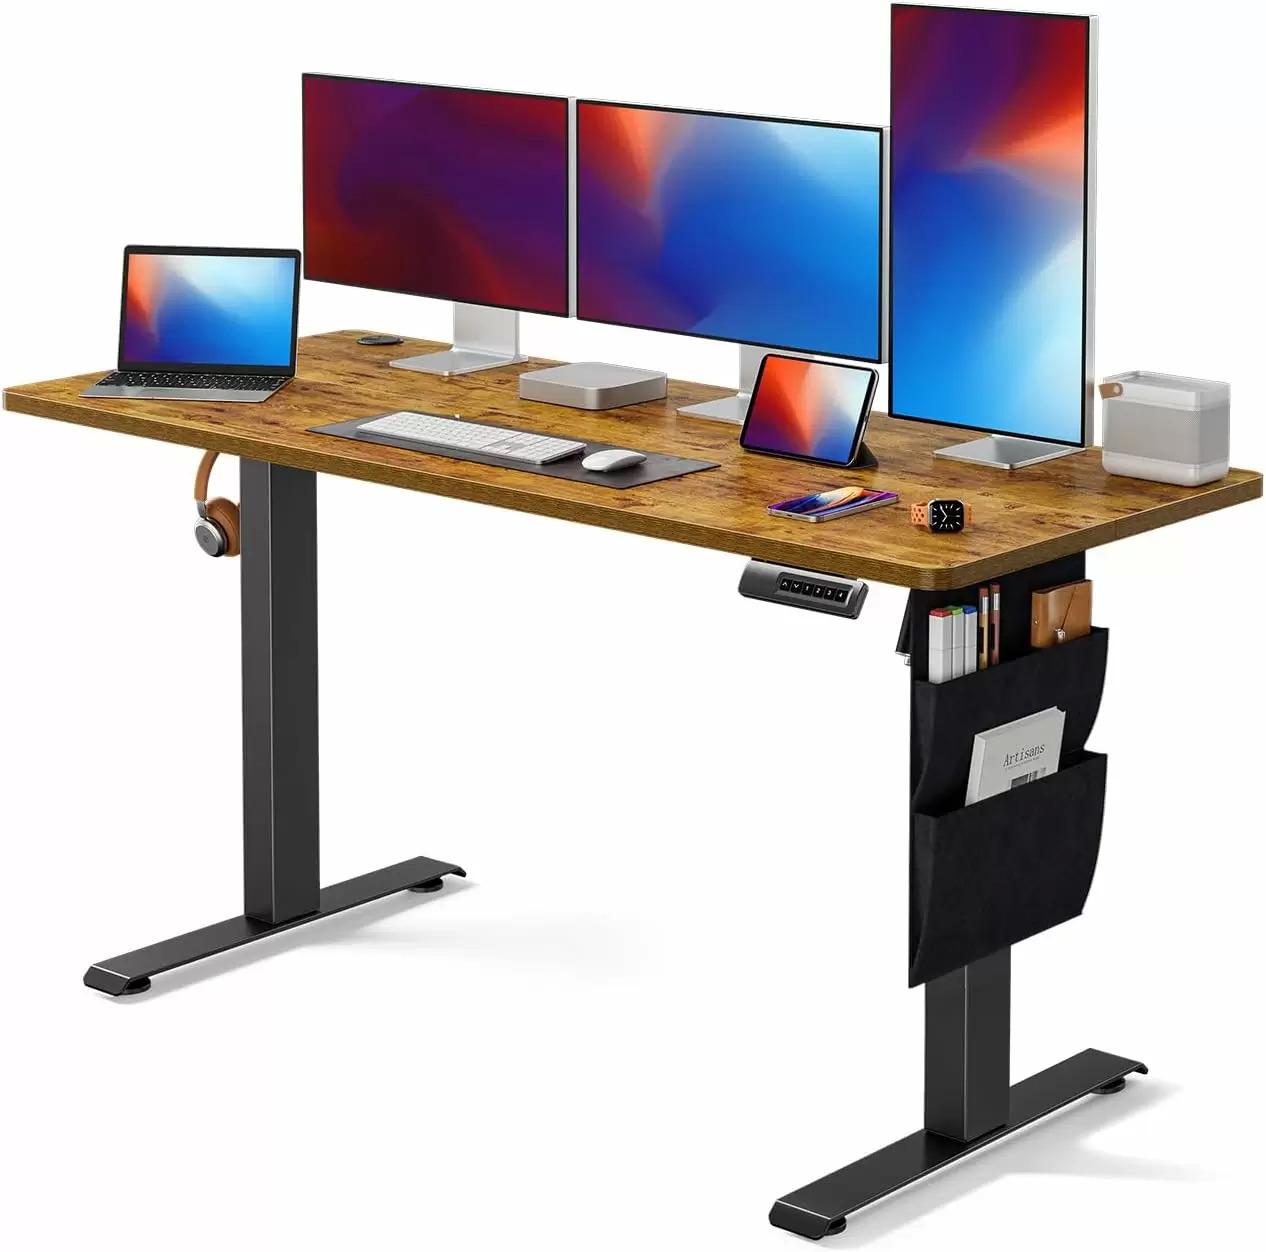 55in Marsail Adjustable Height Standing Desk for $114.99 Shipped